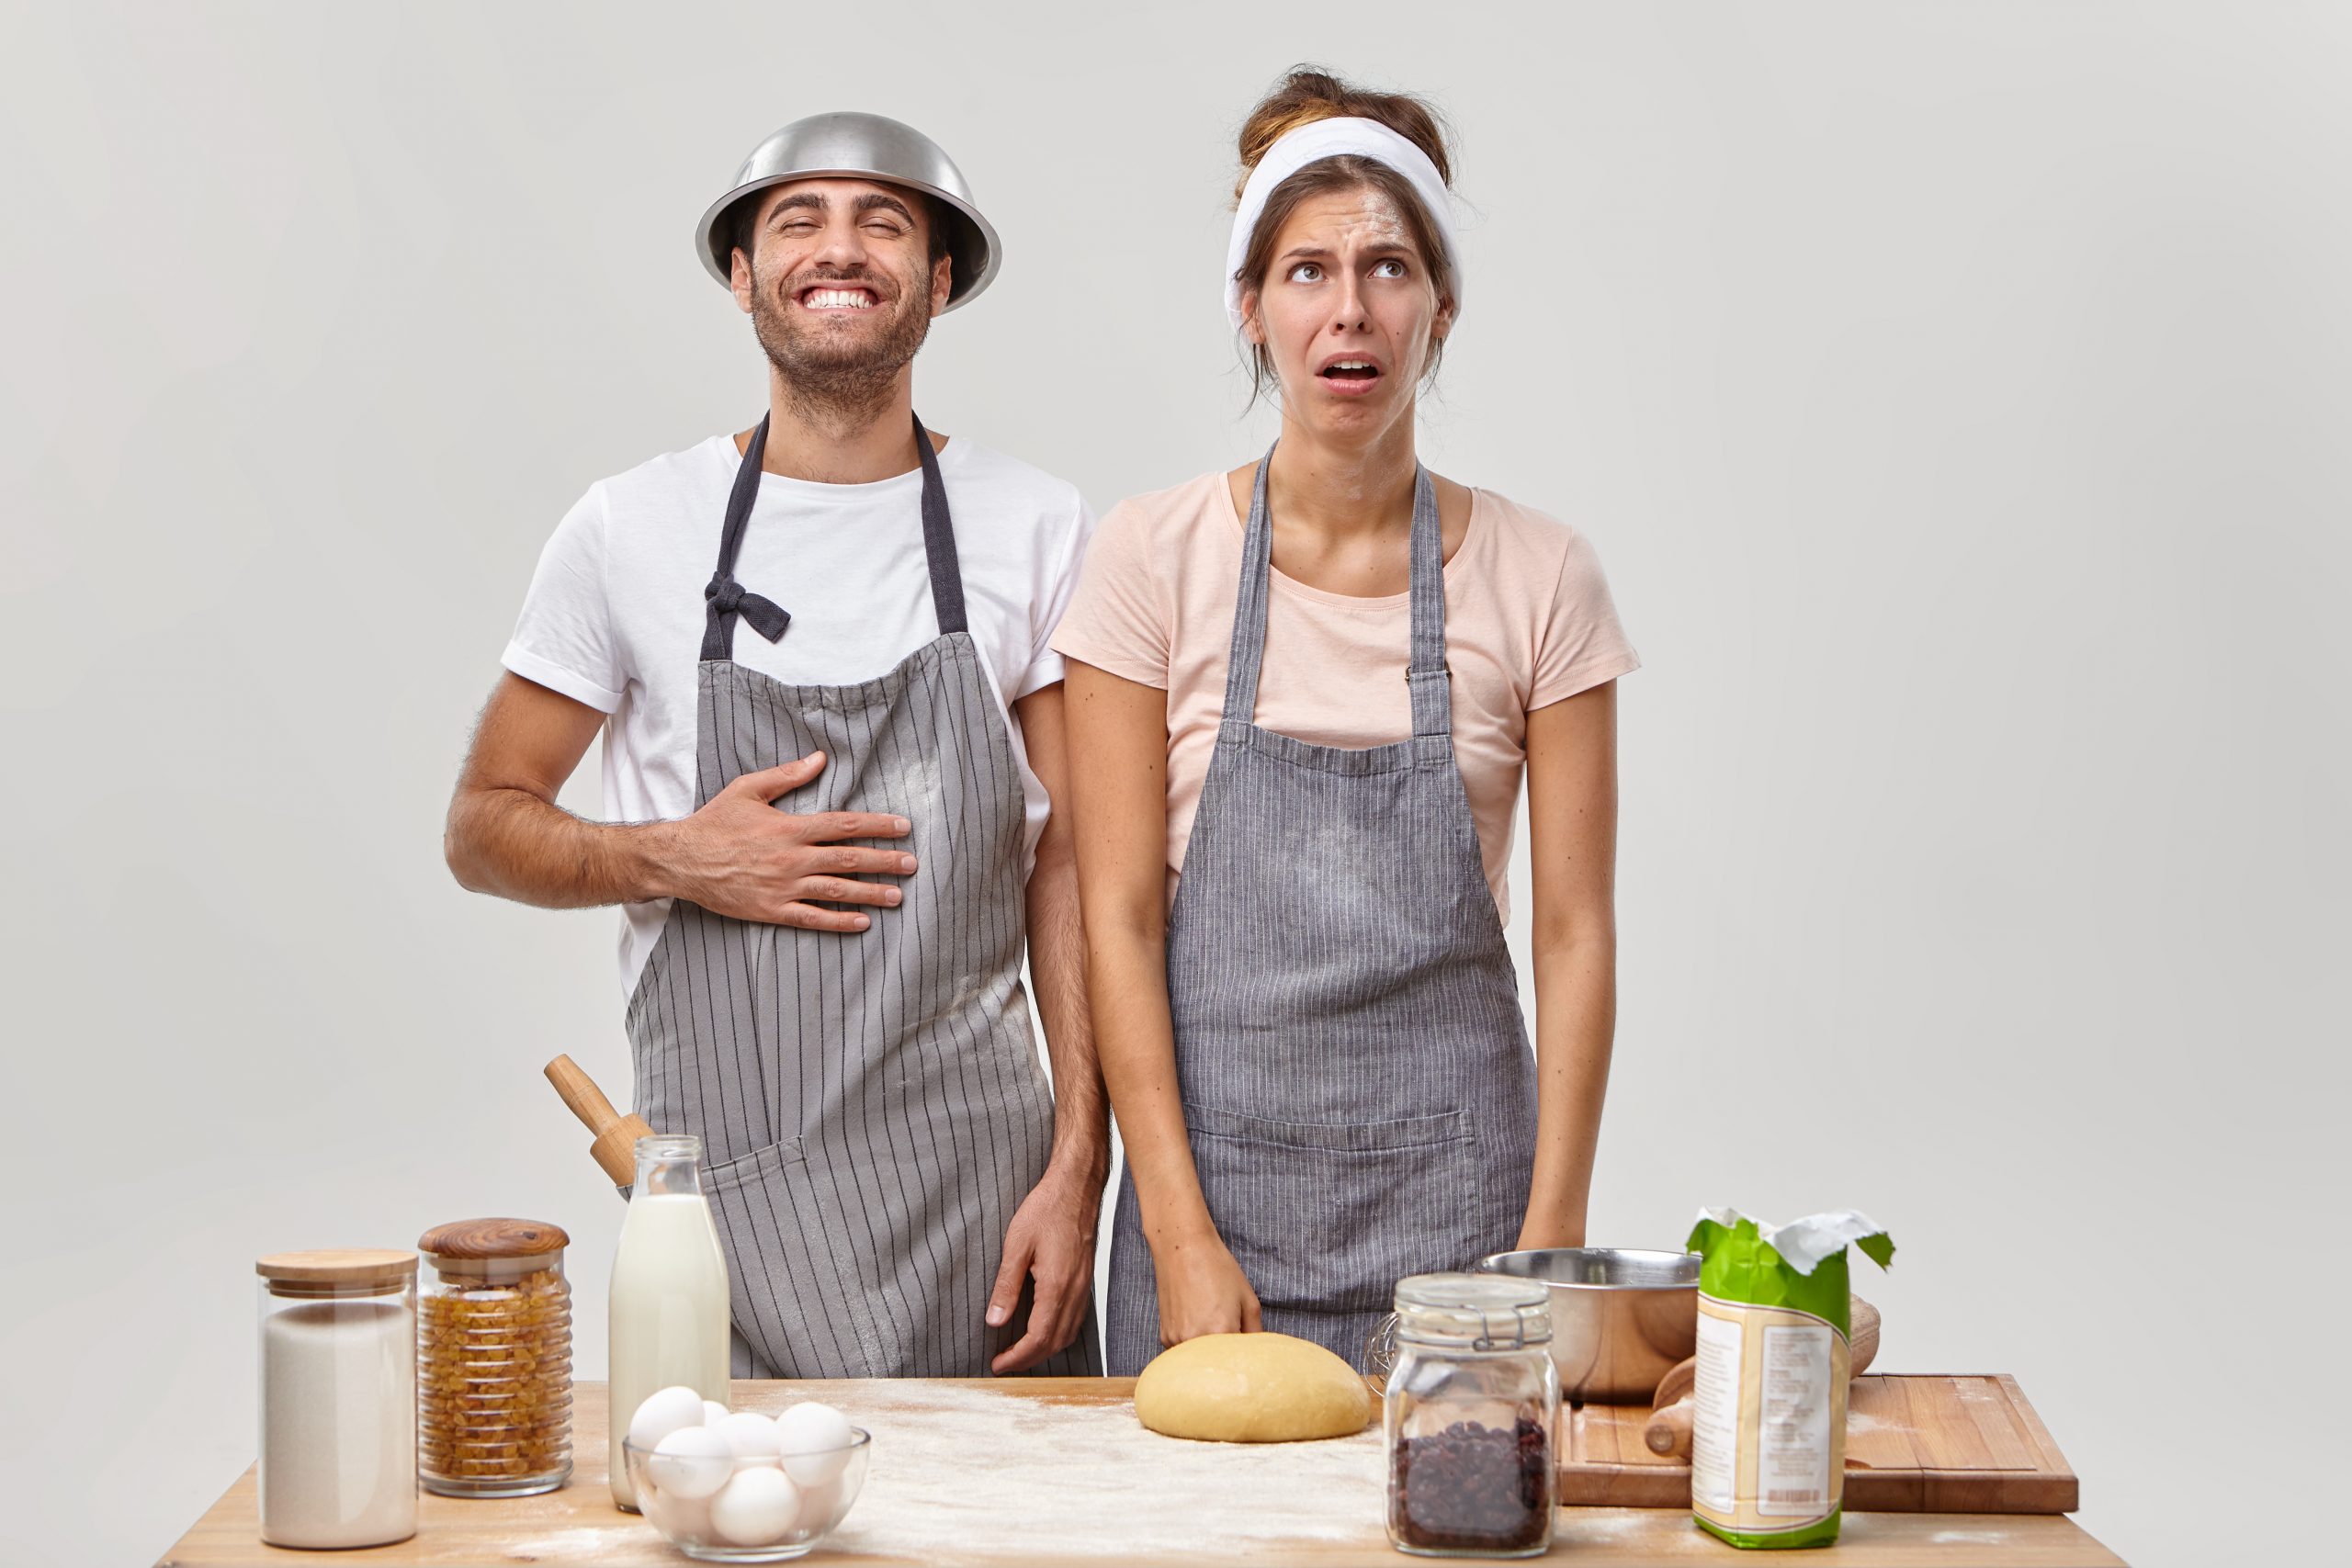 What Kind Kitchen Nightmare Chef Are You? – How Newdie Mag thinks you’ll fail in the kitchen